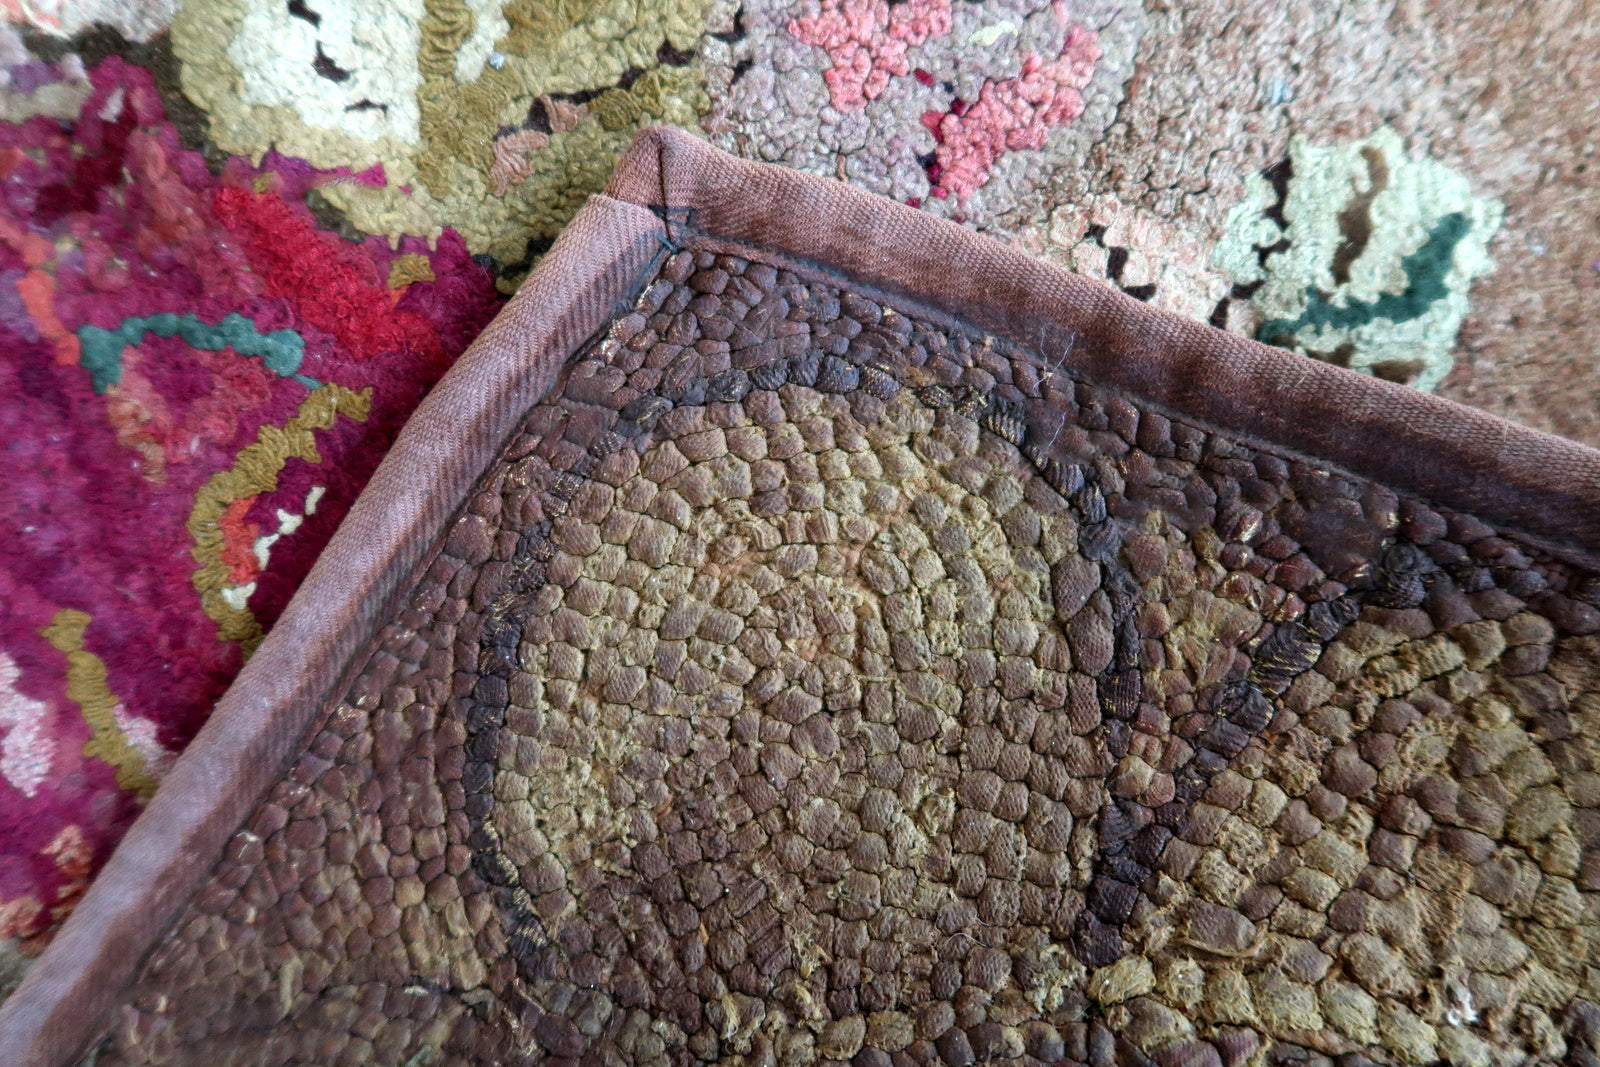 Handmade antique American Hooked rug in primitive floral design. The rug is from the end of 19th century. It has some old restorations, the back side has some old glue on it(we will cover it with fabric to make it stronger).